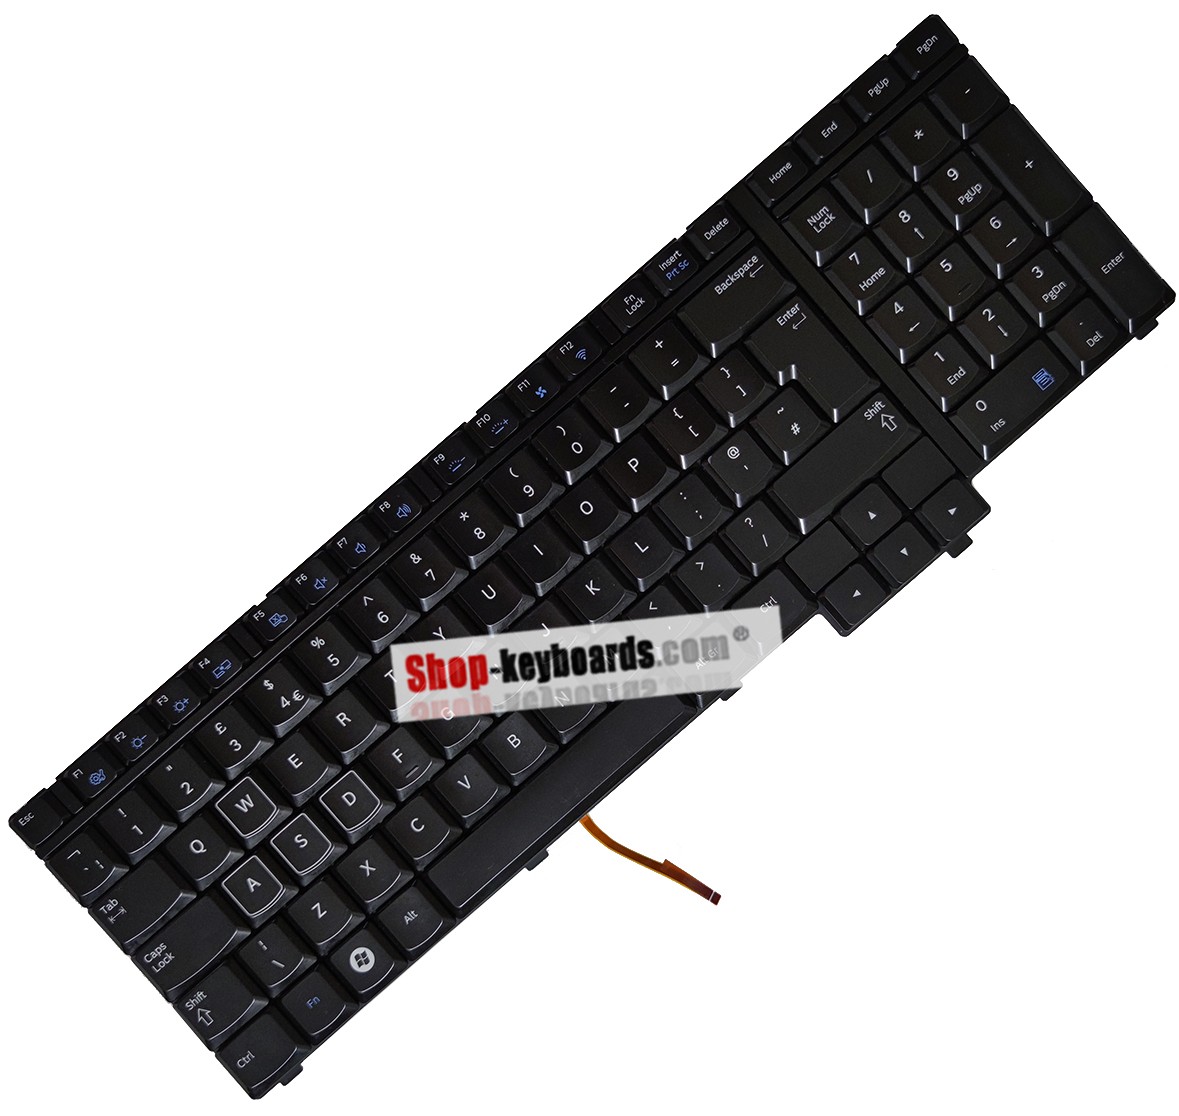 Samsung 700G7A Keyboard replacement